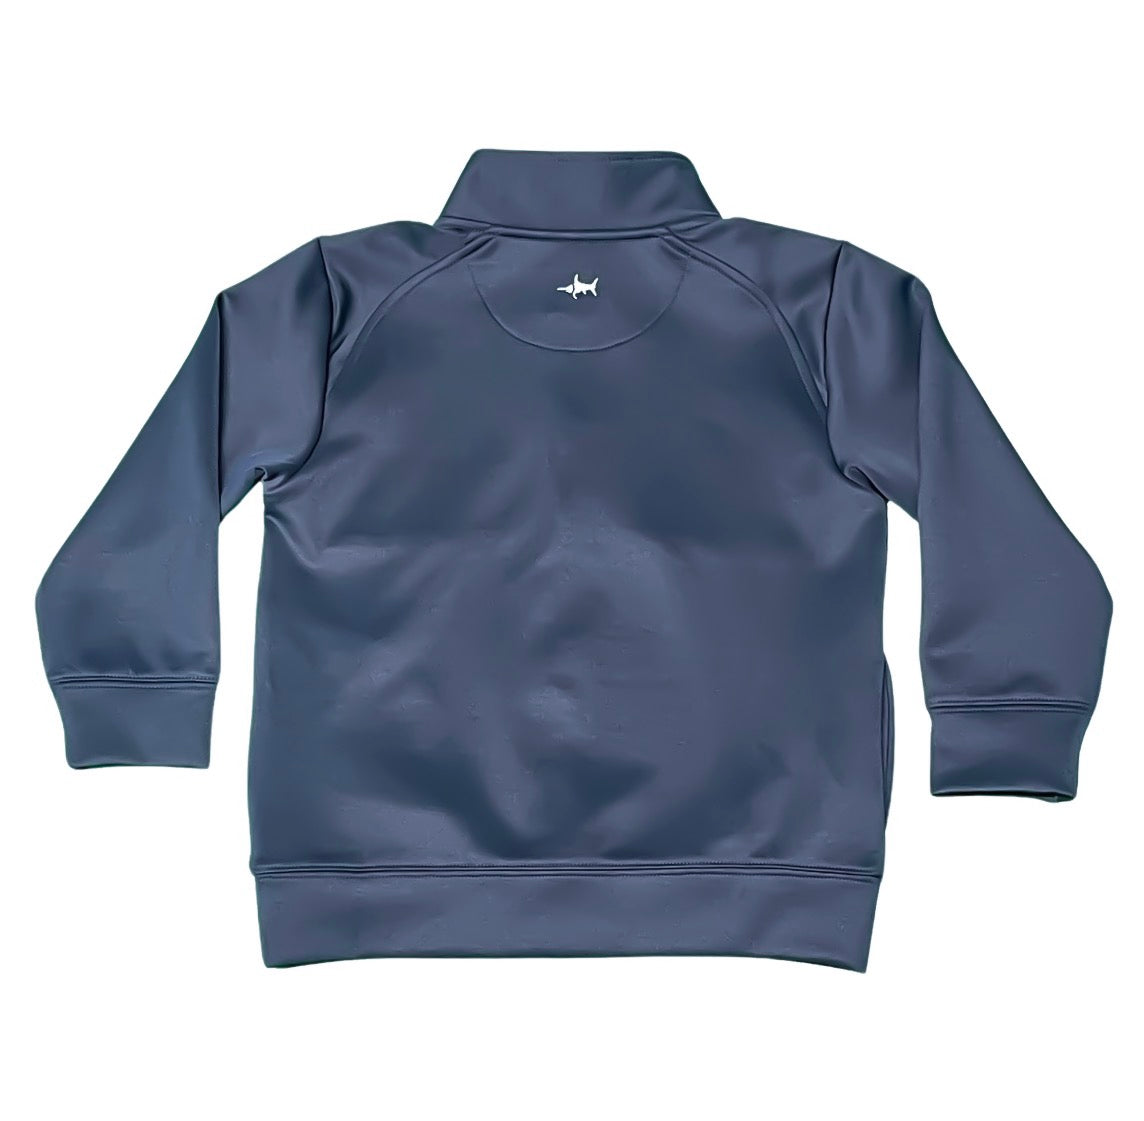 Pierce Performance Pullover in Navy by Saltwater Boys